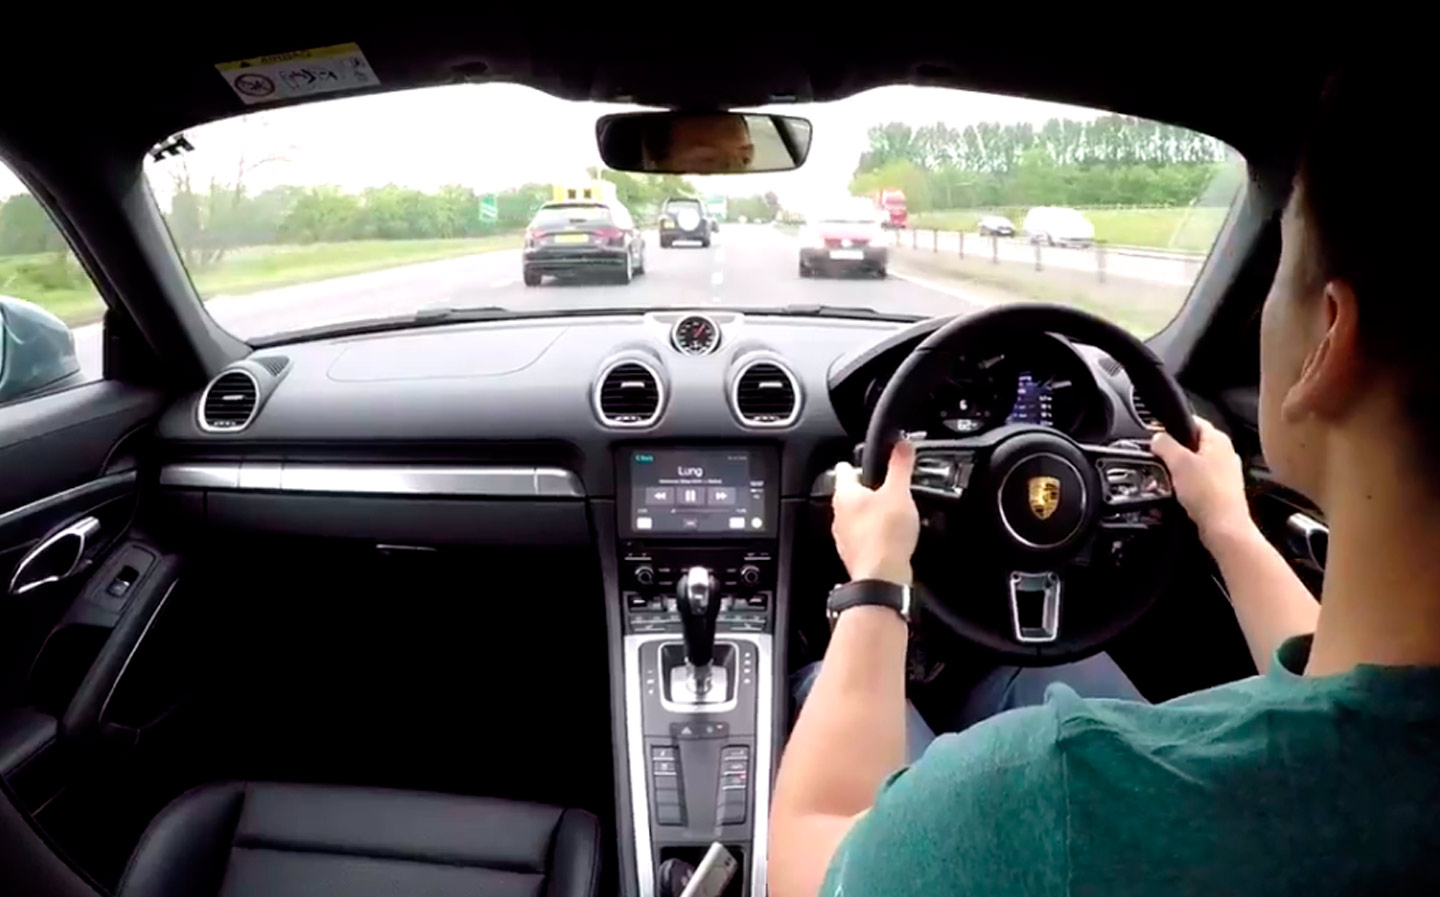 Porsche driver narrowly avoids car travelling wrong way on A3